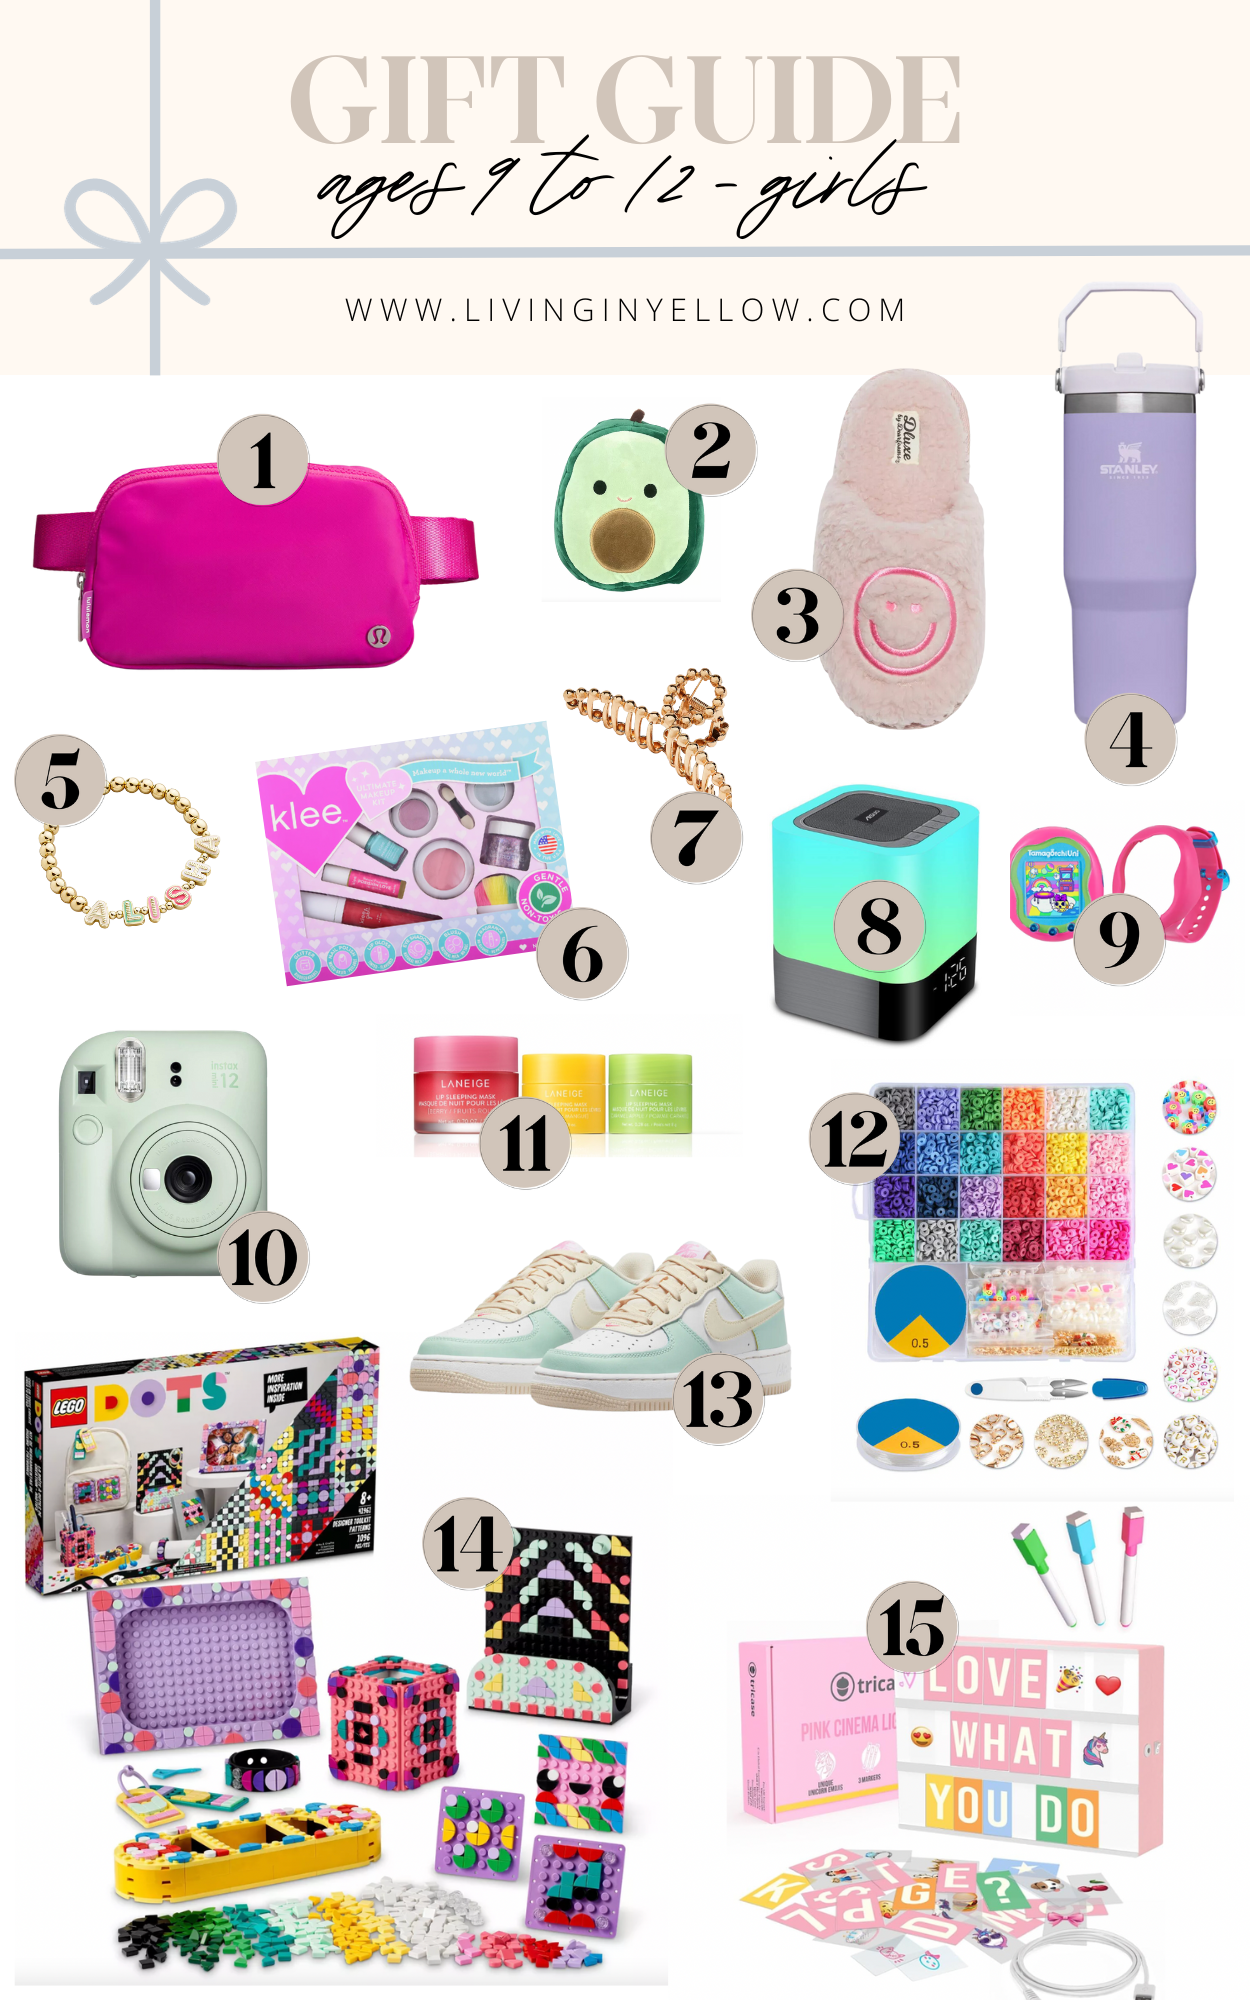 71 Hottest Tween Girl Gift Ideas in 2023 for 9-12-Year-Olds